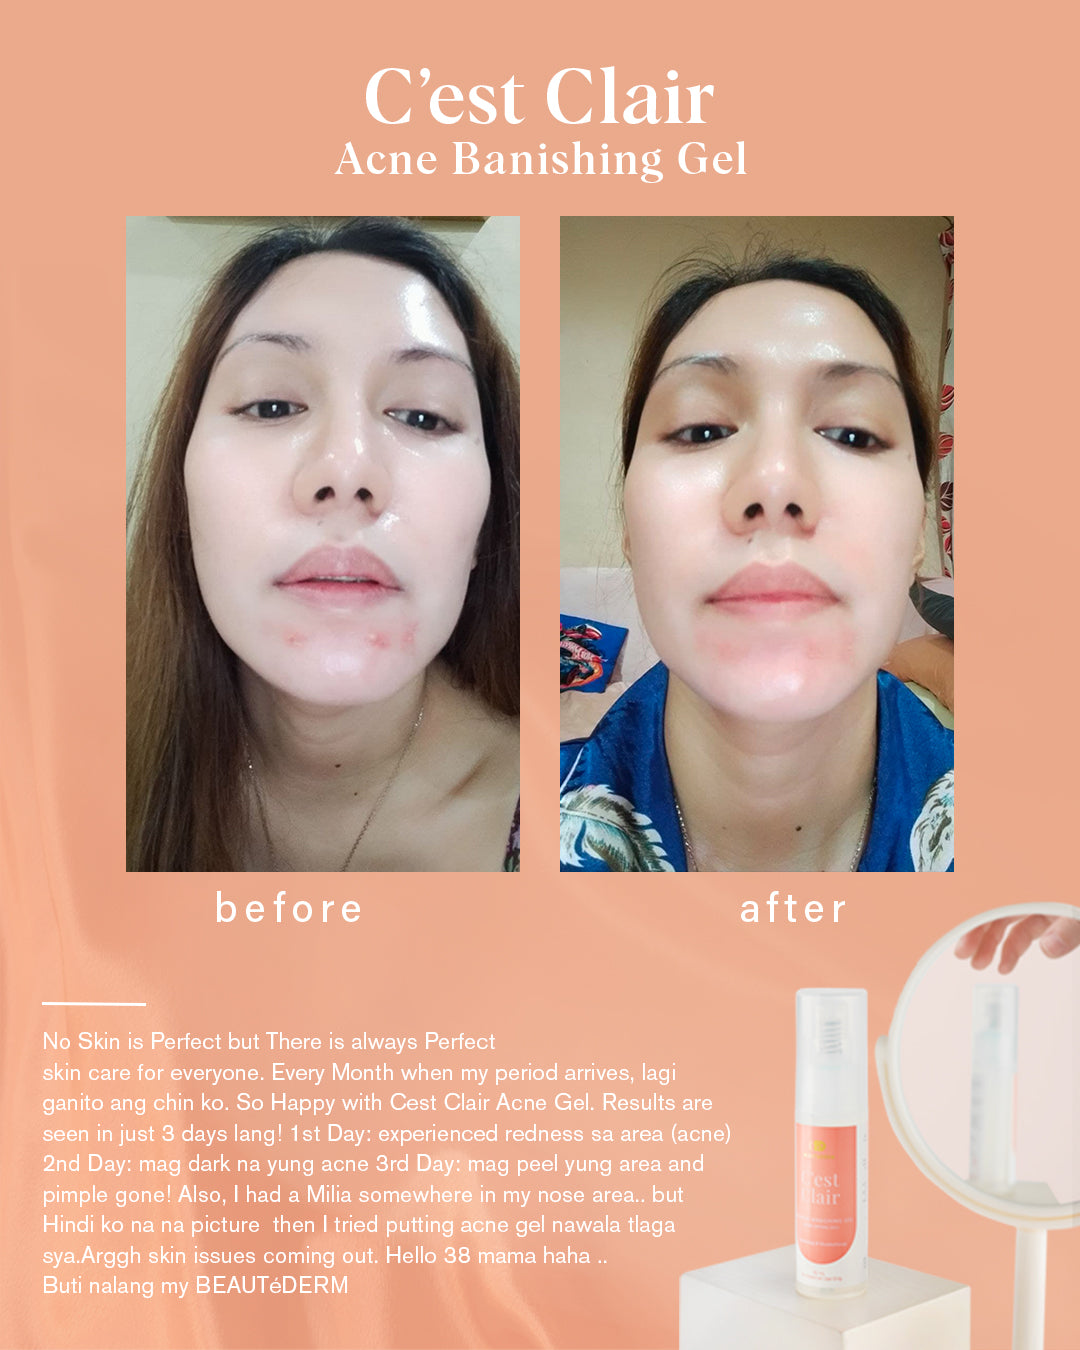 Beautederm Cest Clair Acne Drying Gel Before After Testimonial